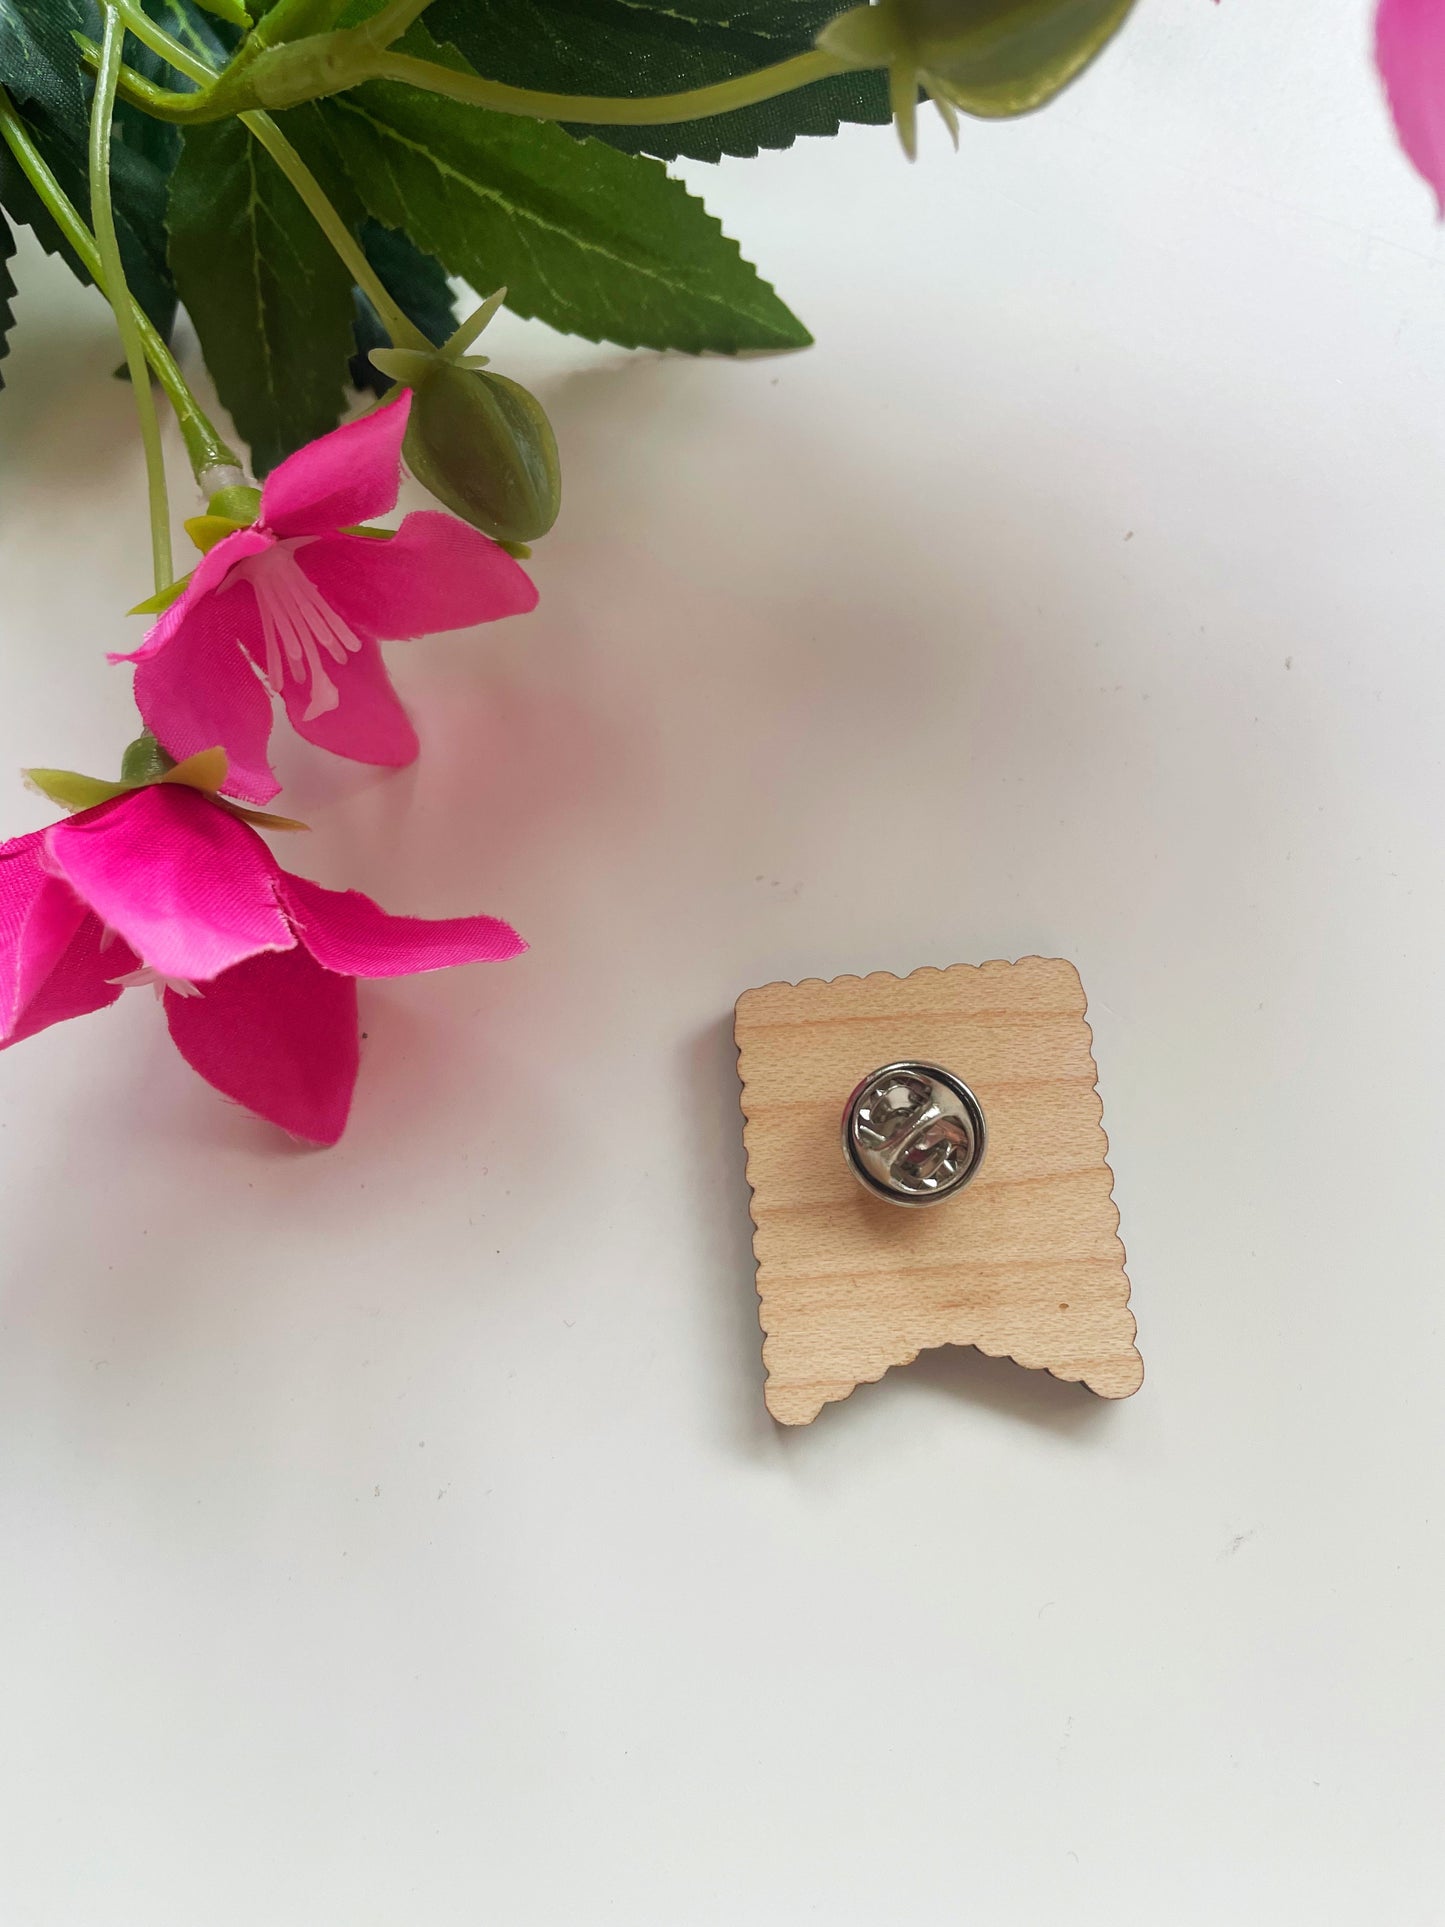 Have A Nap & Try Again Wooden Pin Badge